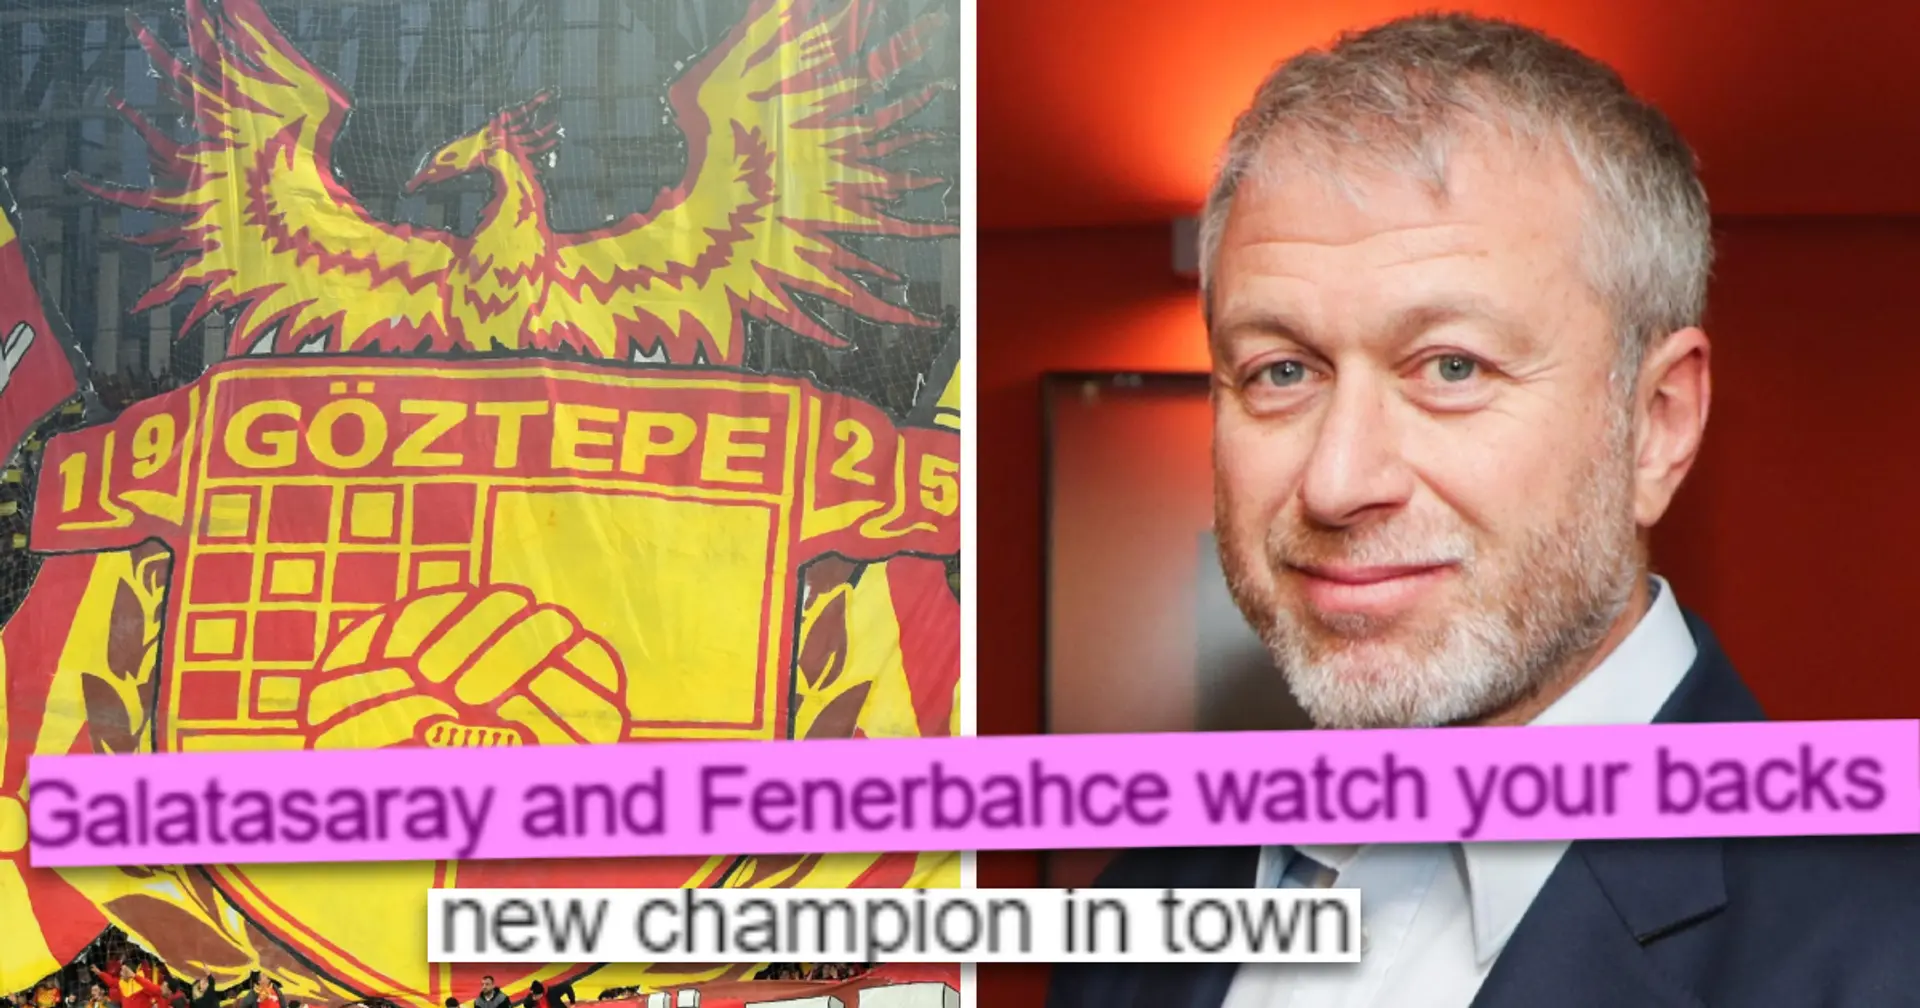 'Goztepe away in Champions League will be class': Blues react to rumour Abramovich wants to buy new club